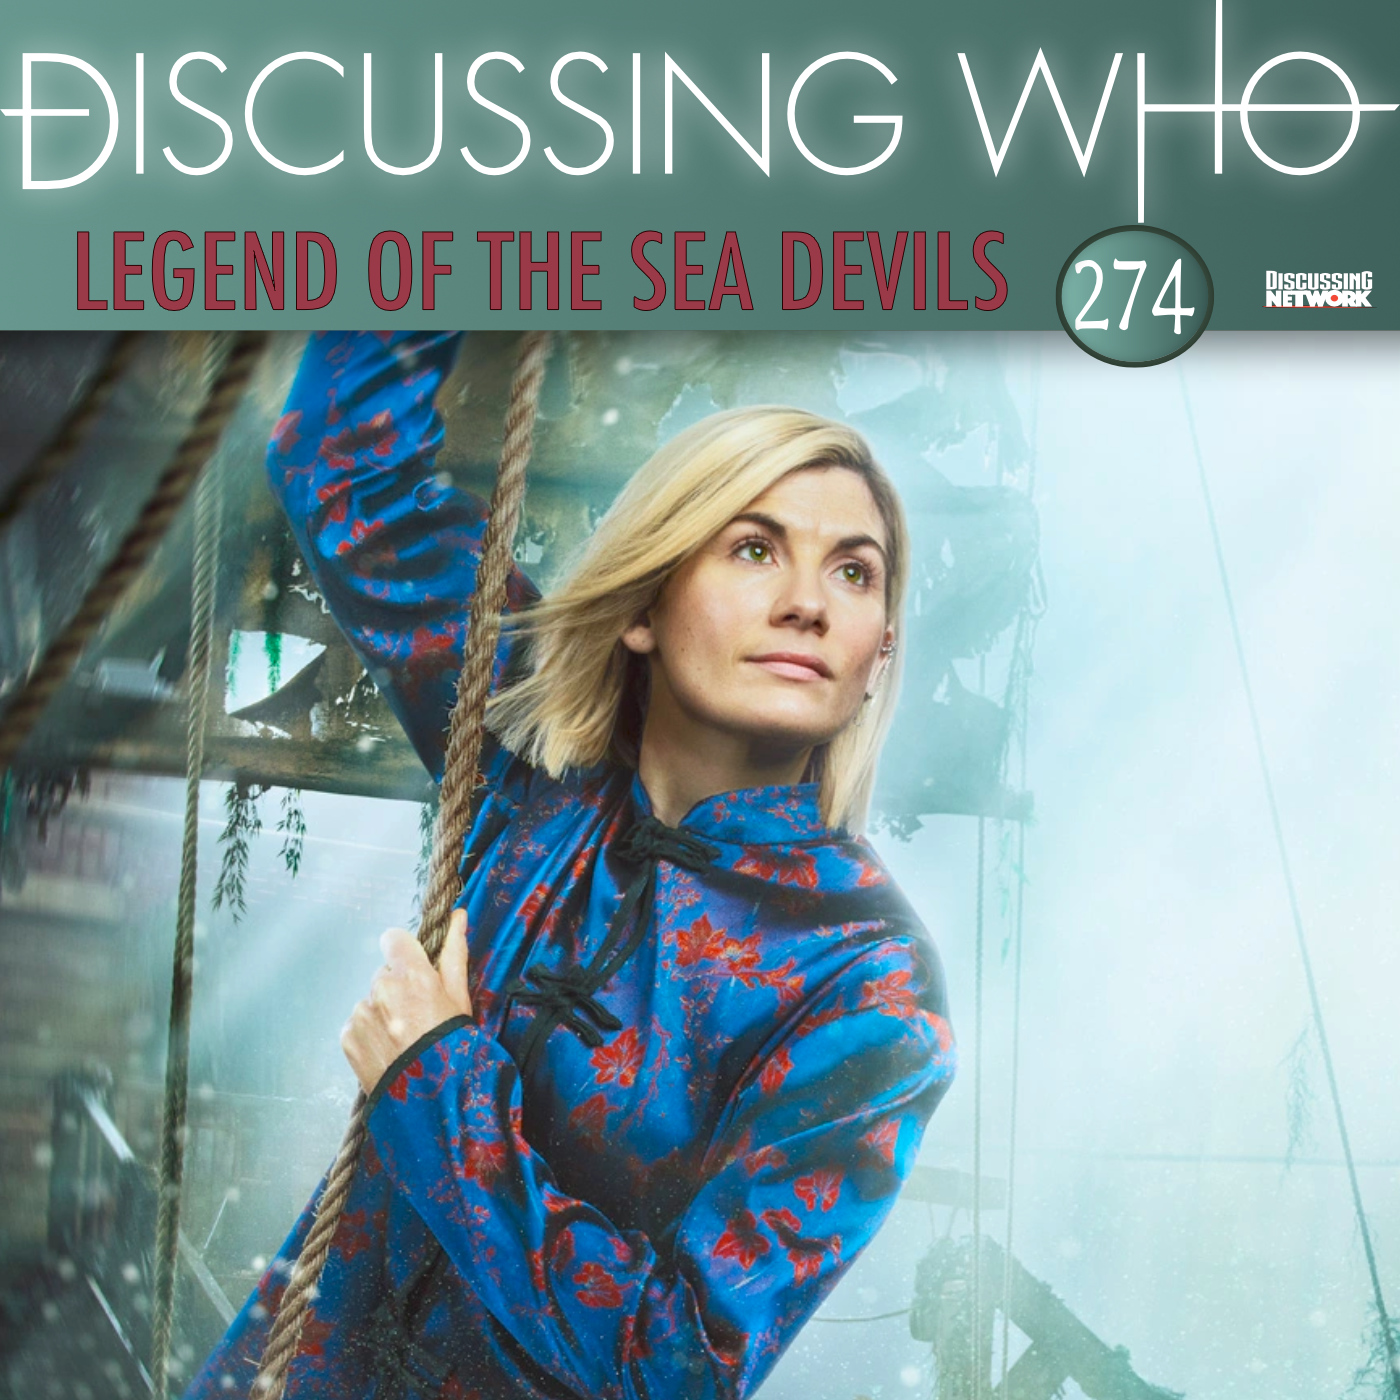 Discussing Who Review of Legend of the Sea Devils